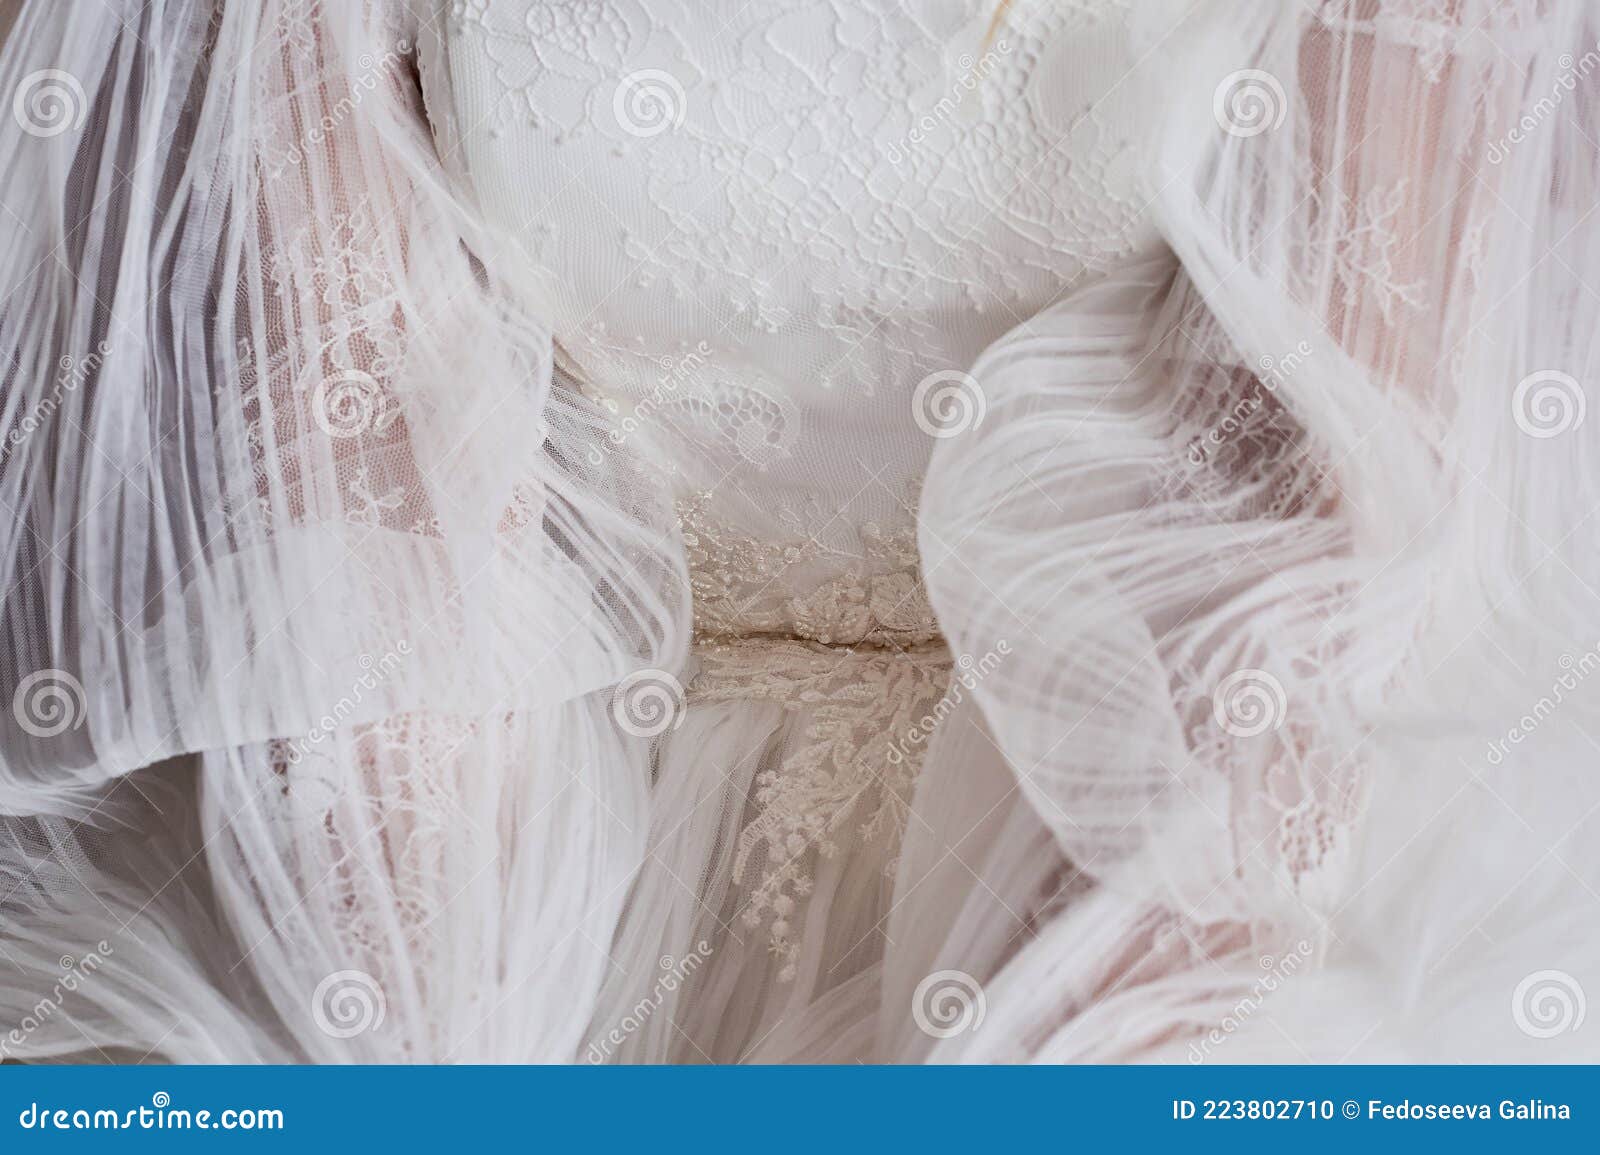 White Lace on a Wedding or Evening Dress. Delicate Picture, Texture ...